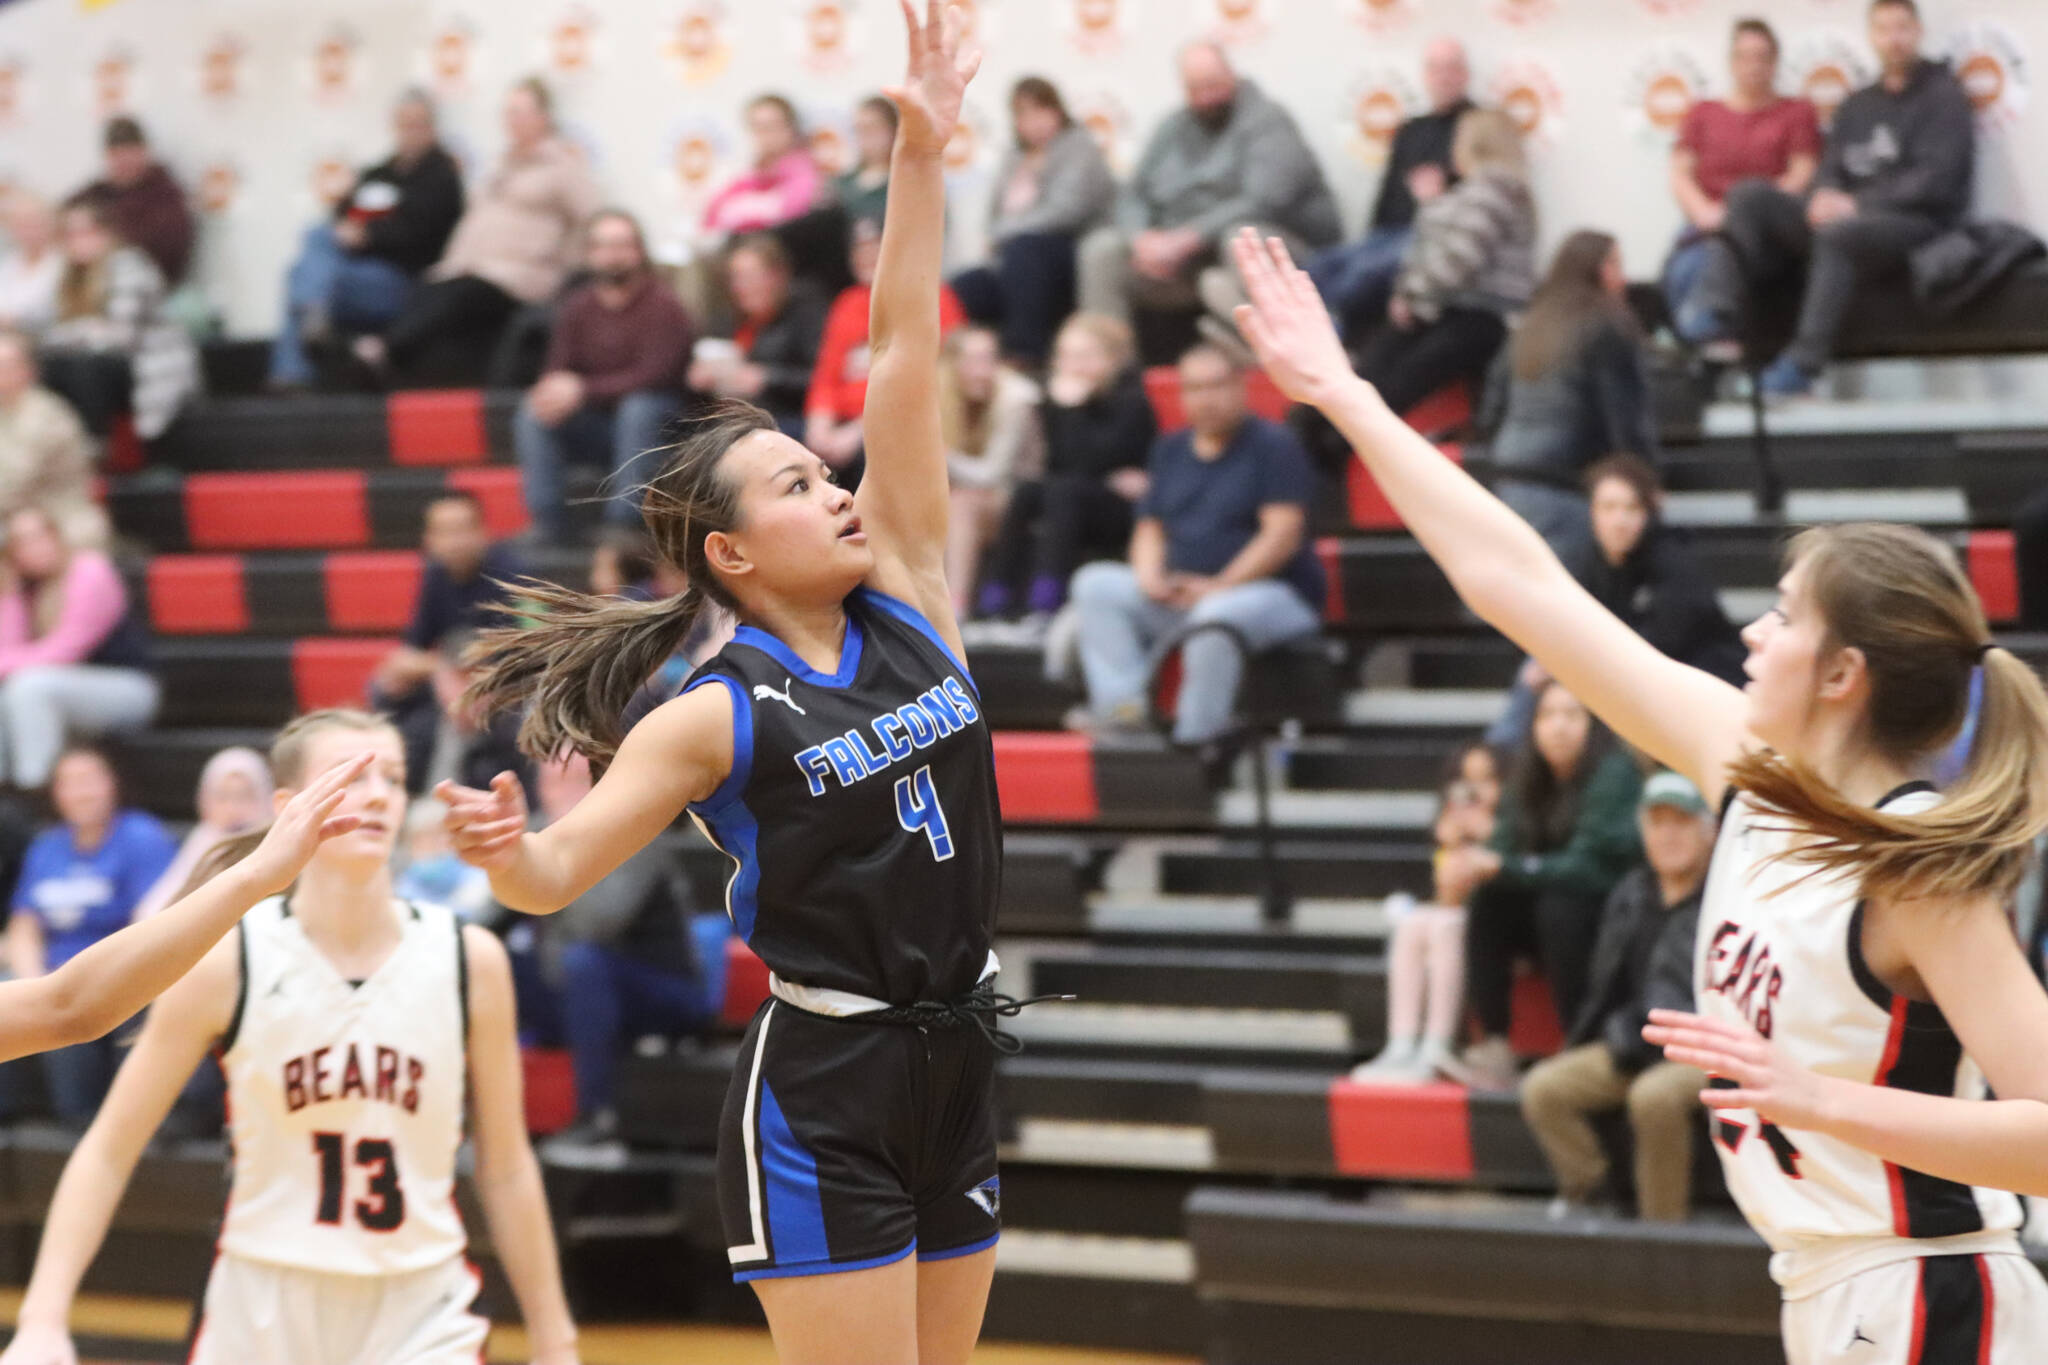 TMHS junior Mikah Caradang puts up a 3-point shot in the second quarter Tuesday night during a conference game against JDHS. Caradang would finish the game with a total of 6 points. (Jonson Kuhn / Juneau Empire)